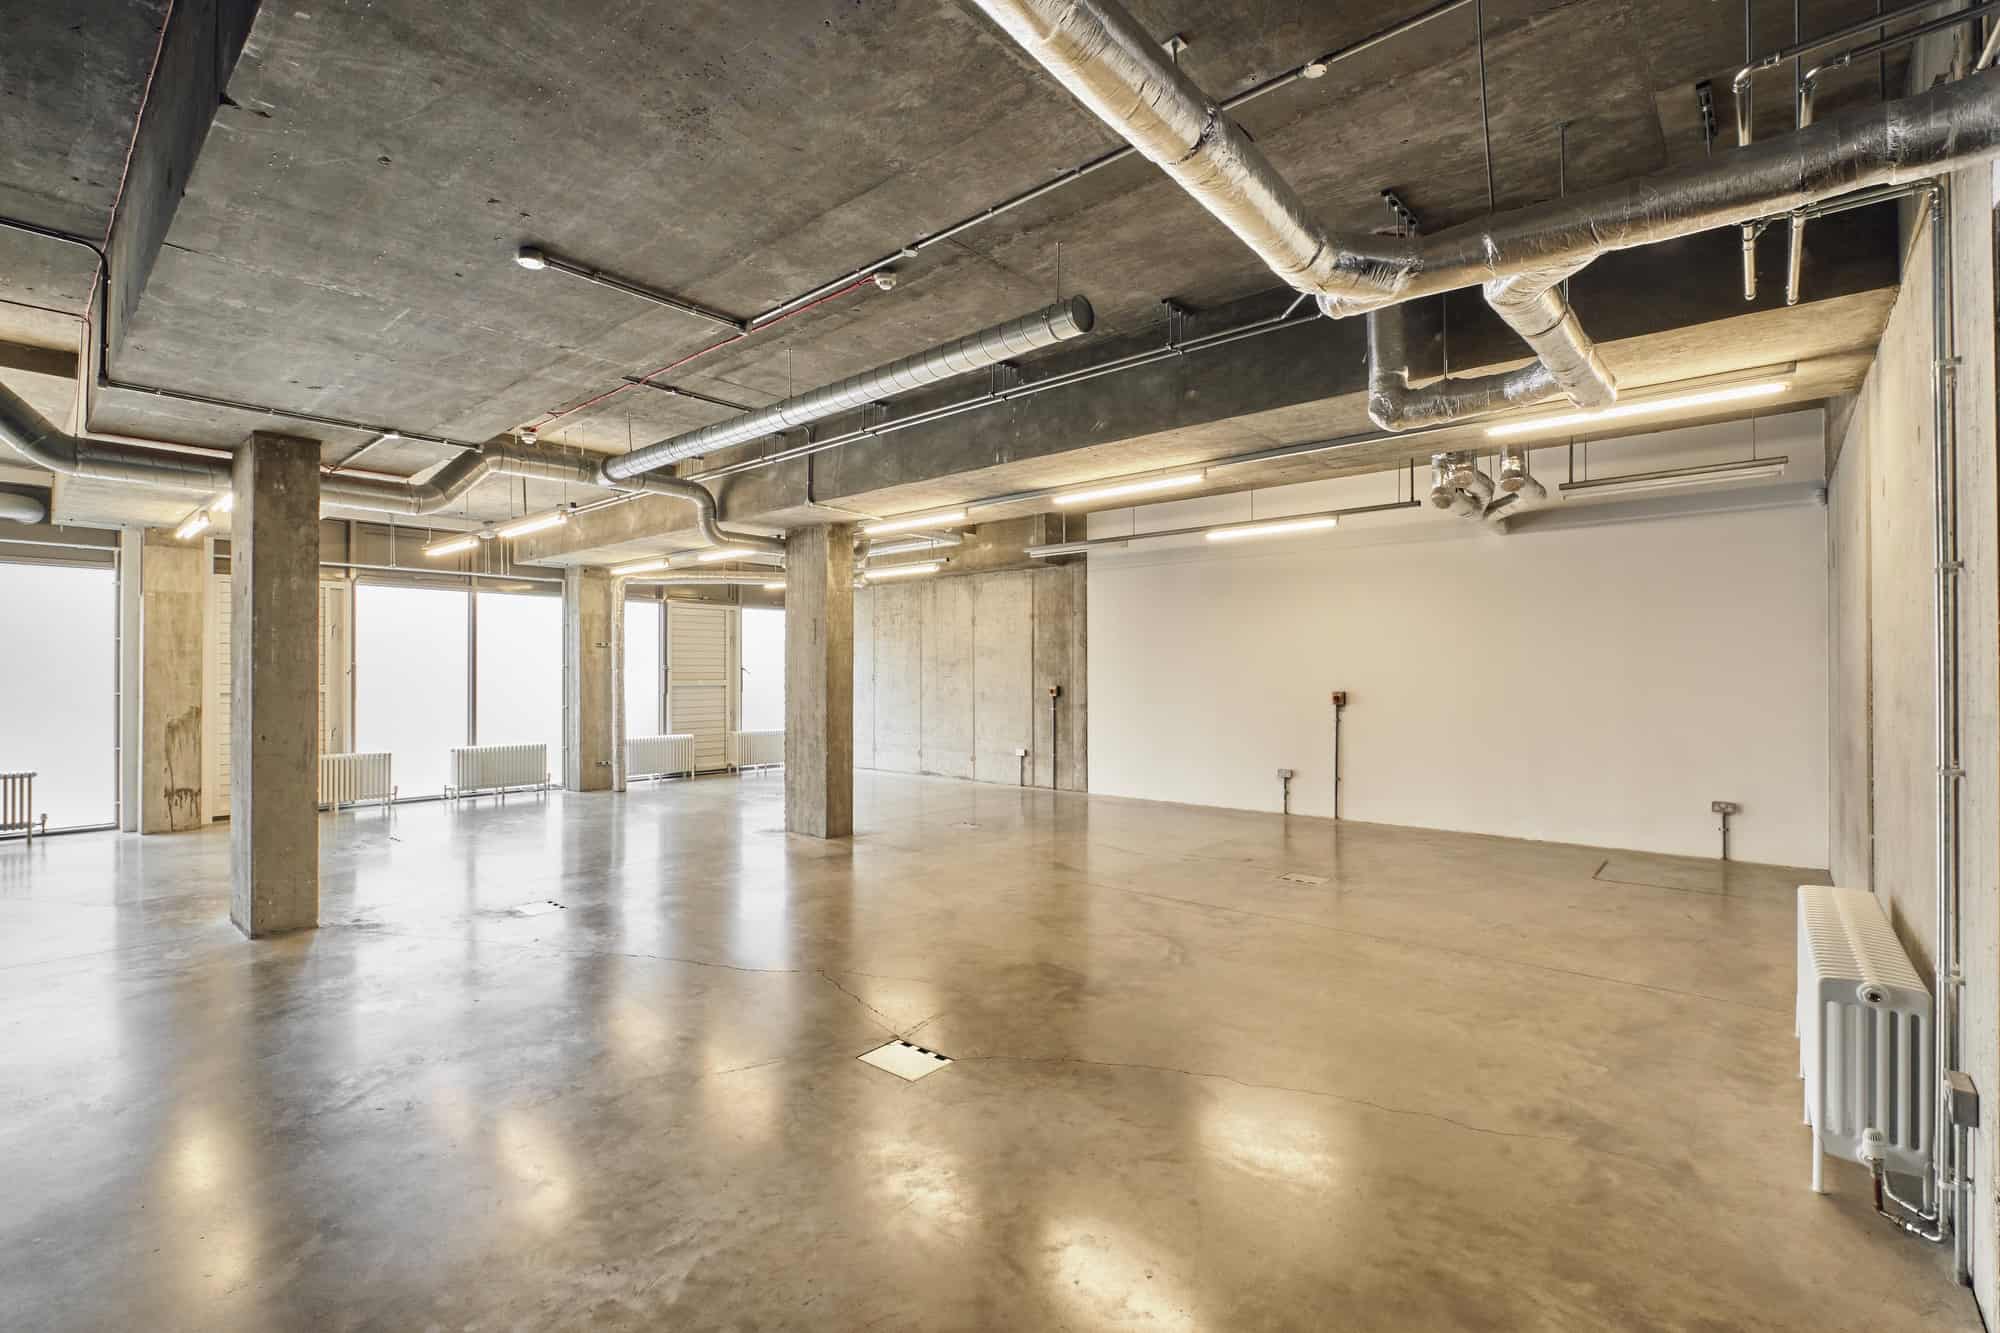 Haggerston Six N1 - A beautiful studio space with polished concrete floors and fantastic natural light. Available for commercial photography and filming - The Location Guys